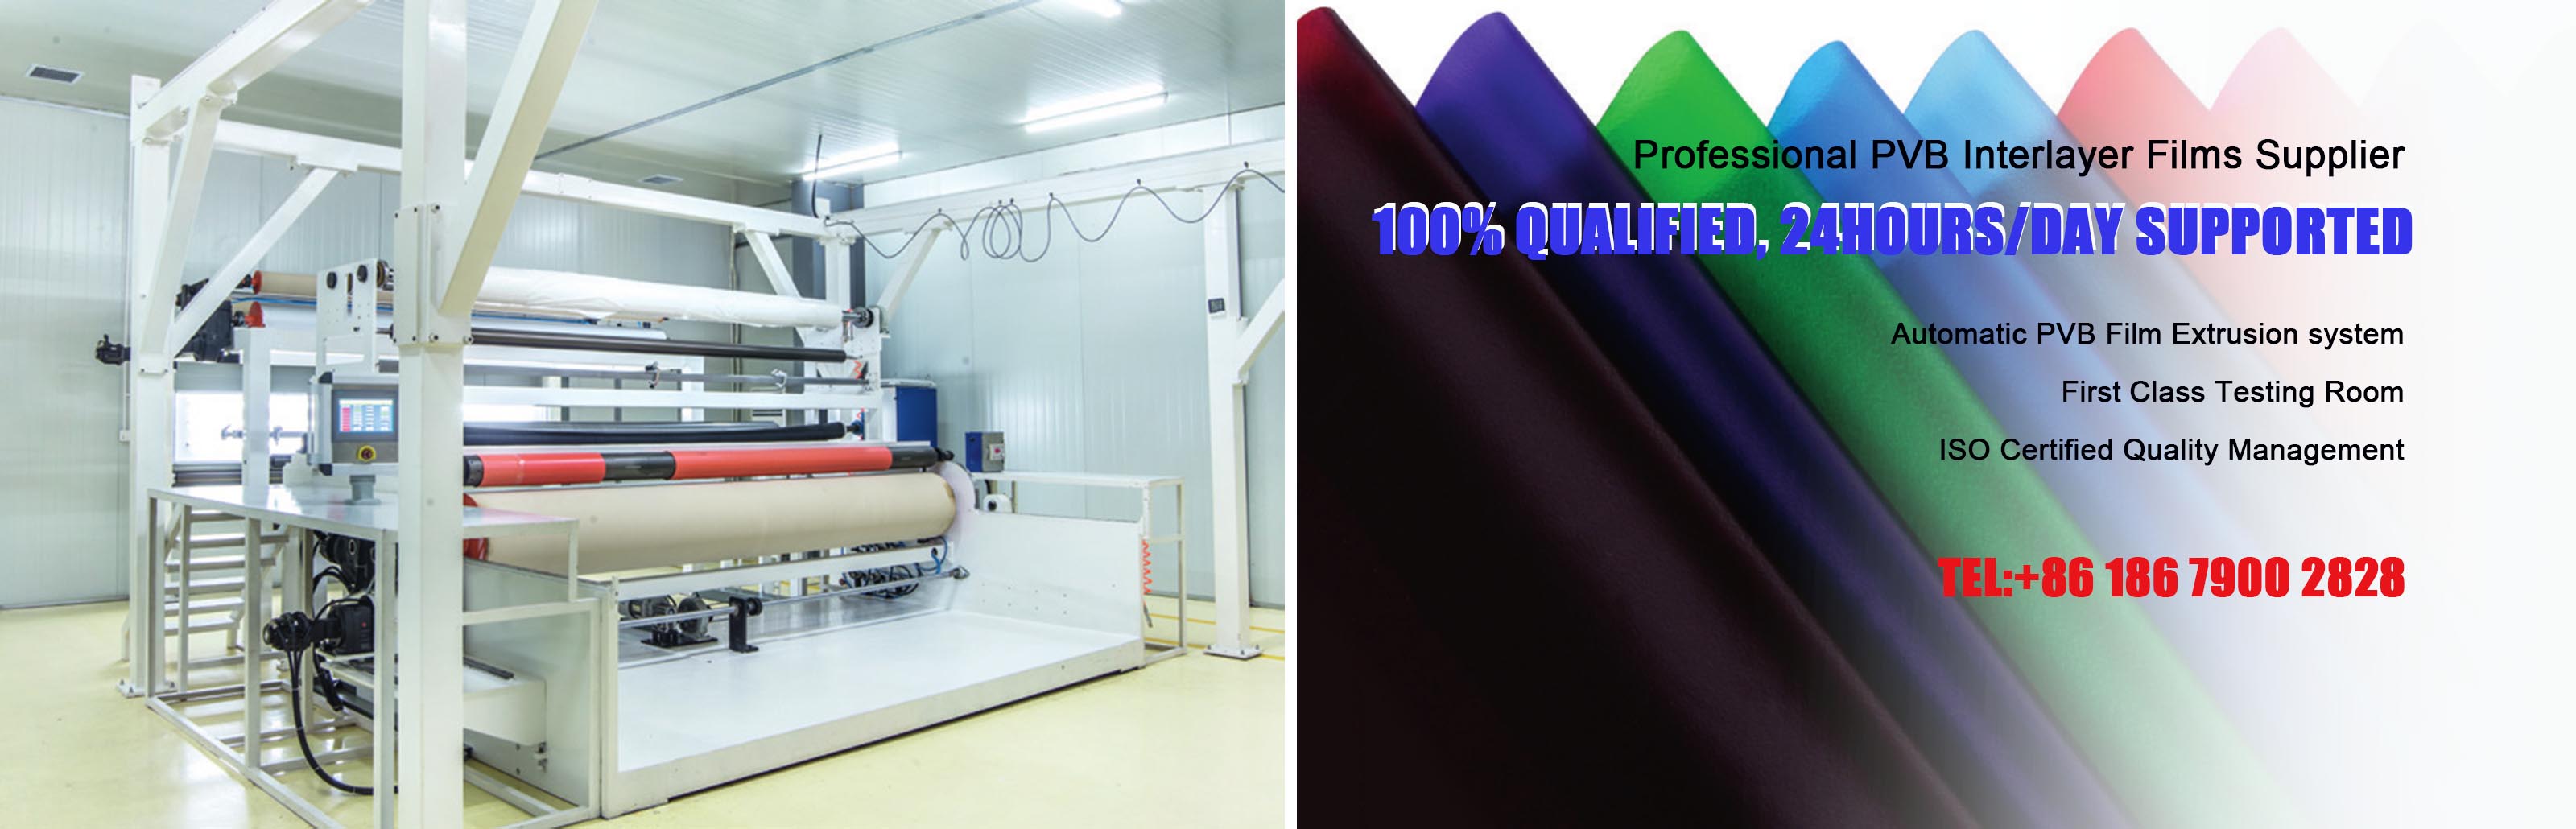 Pvb film, pvb interlayer, pvb interlayer film, interlay film for laminated glass, pvb film for glass, colored PVB film, middle membrane for glass, laminated glass film, Pvb films supplier